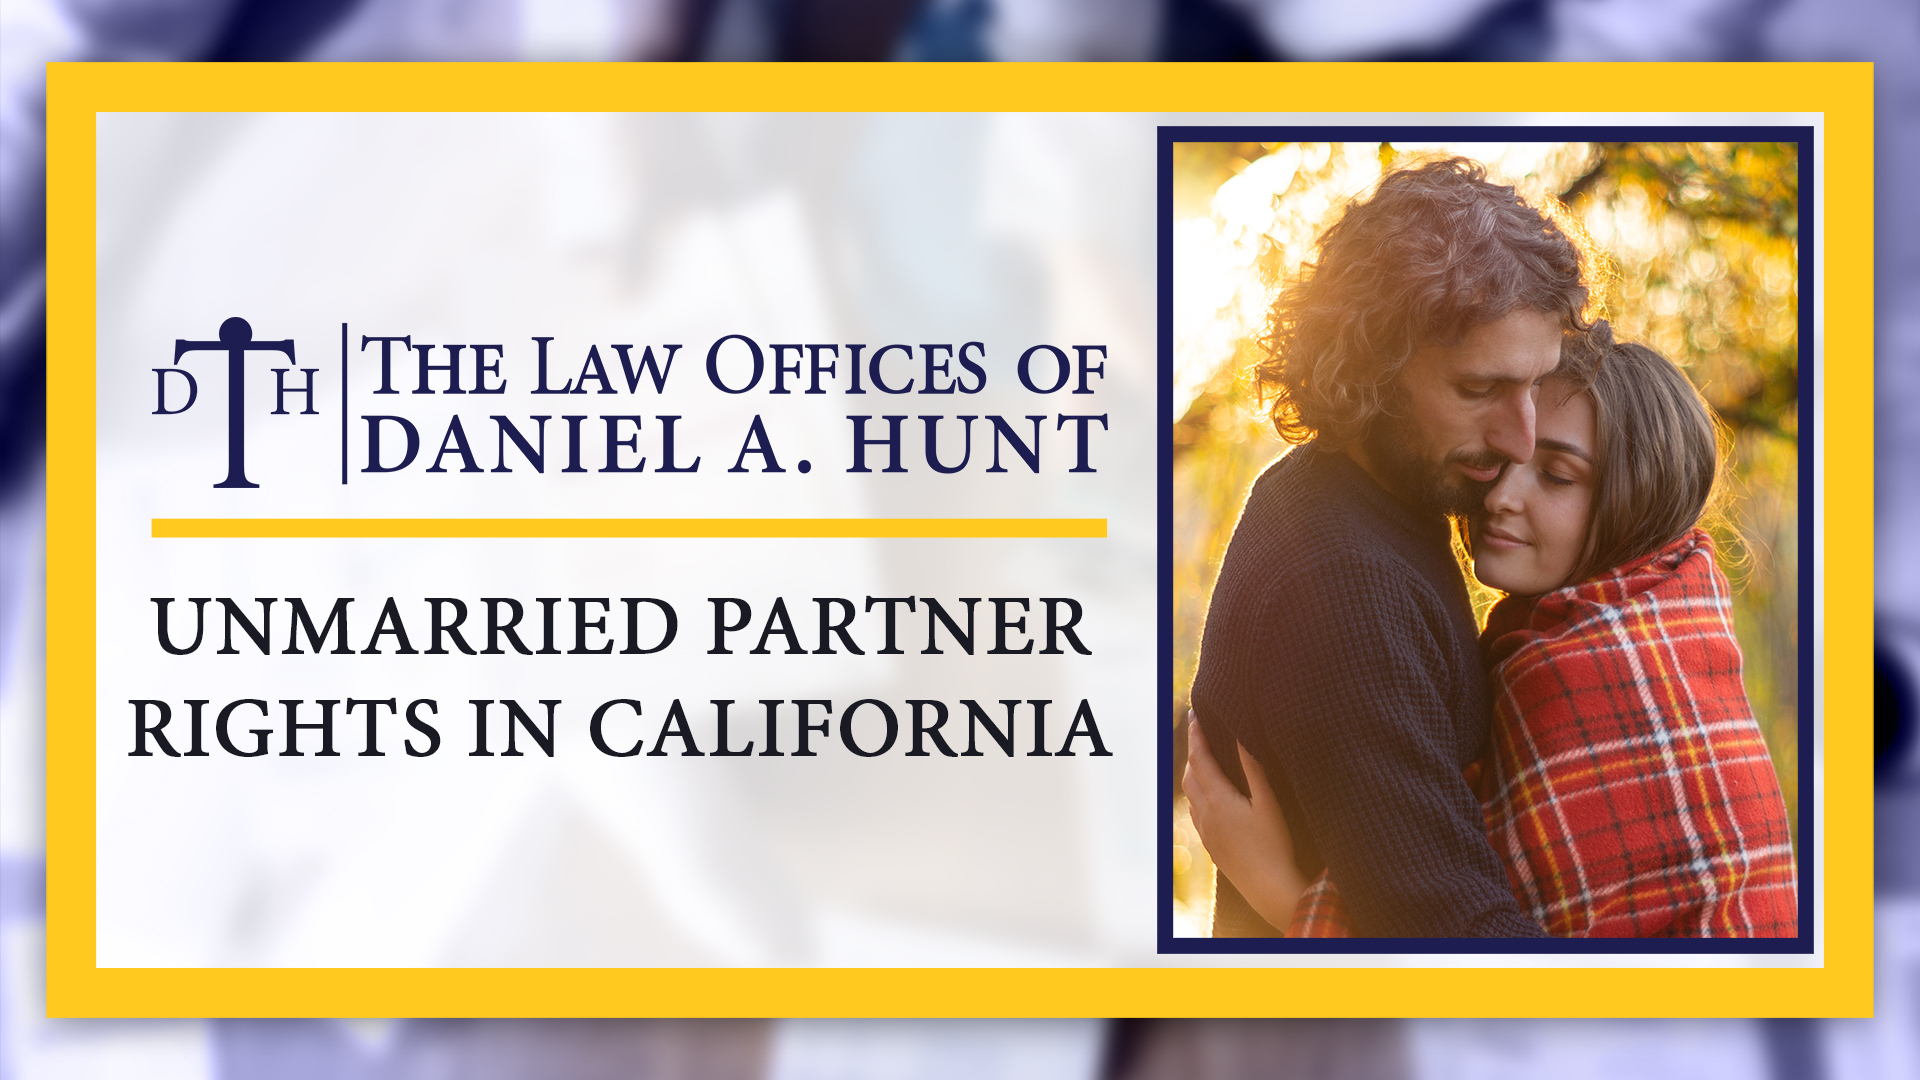 Unmarried partner rights in CA